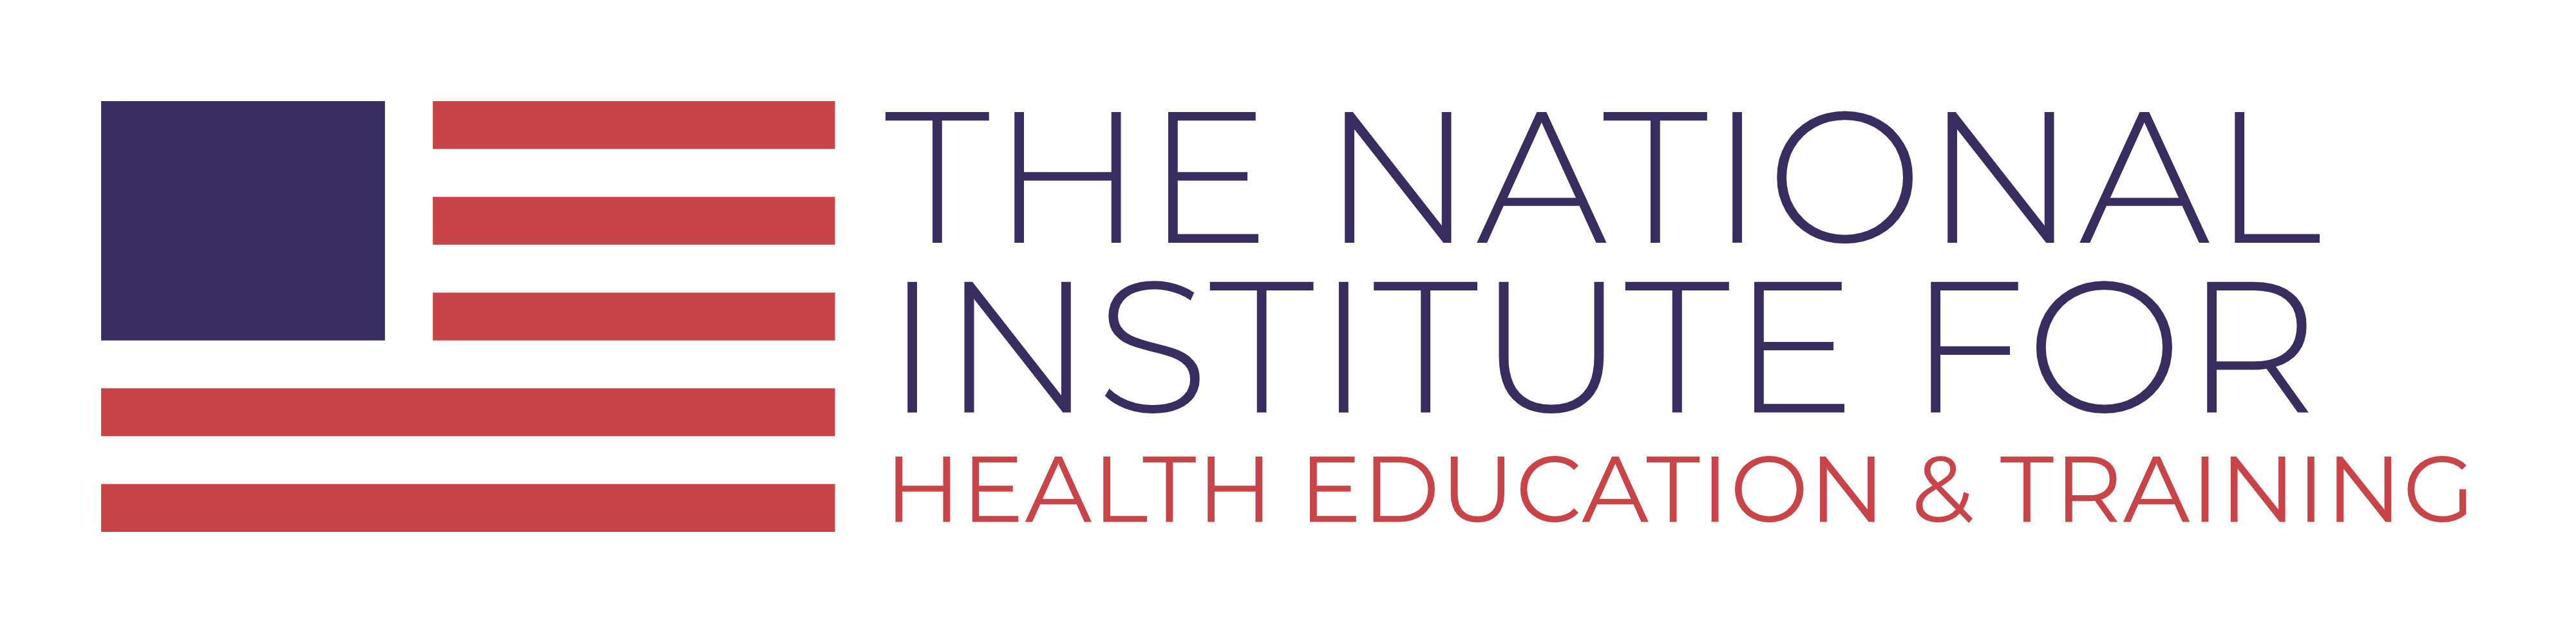 The National Institute for Health Education & Training